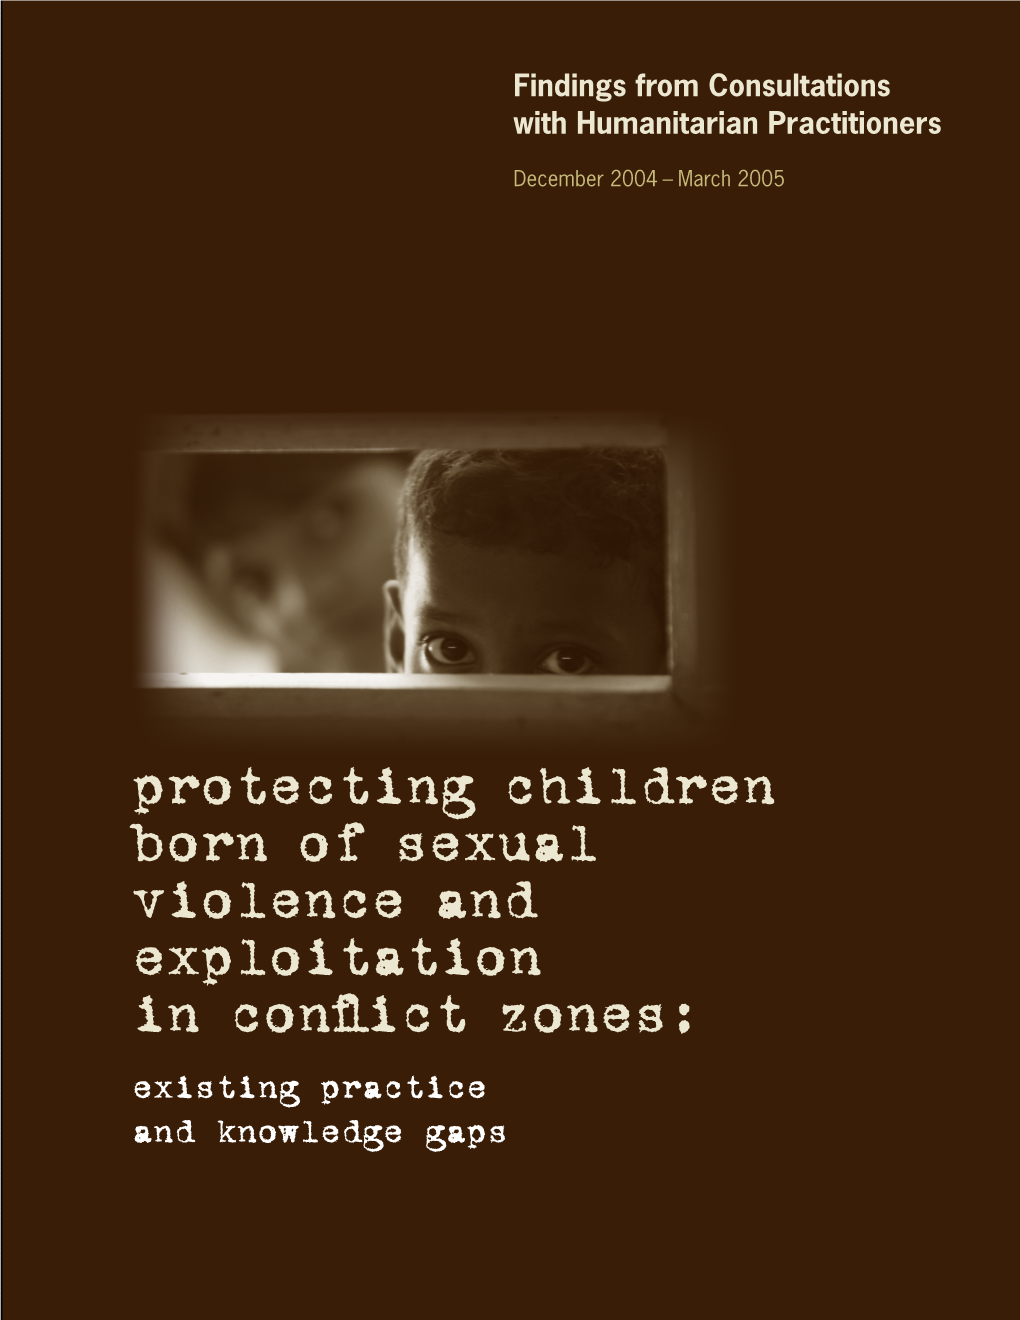 Protecting Children Born of Sexual Violence and Exploitation In